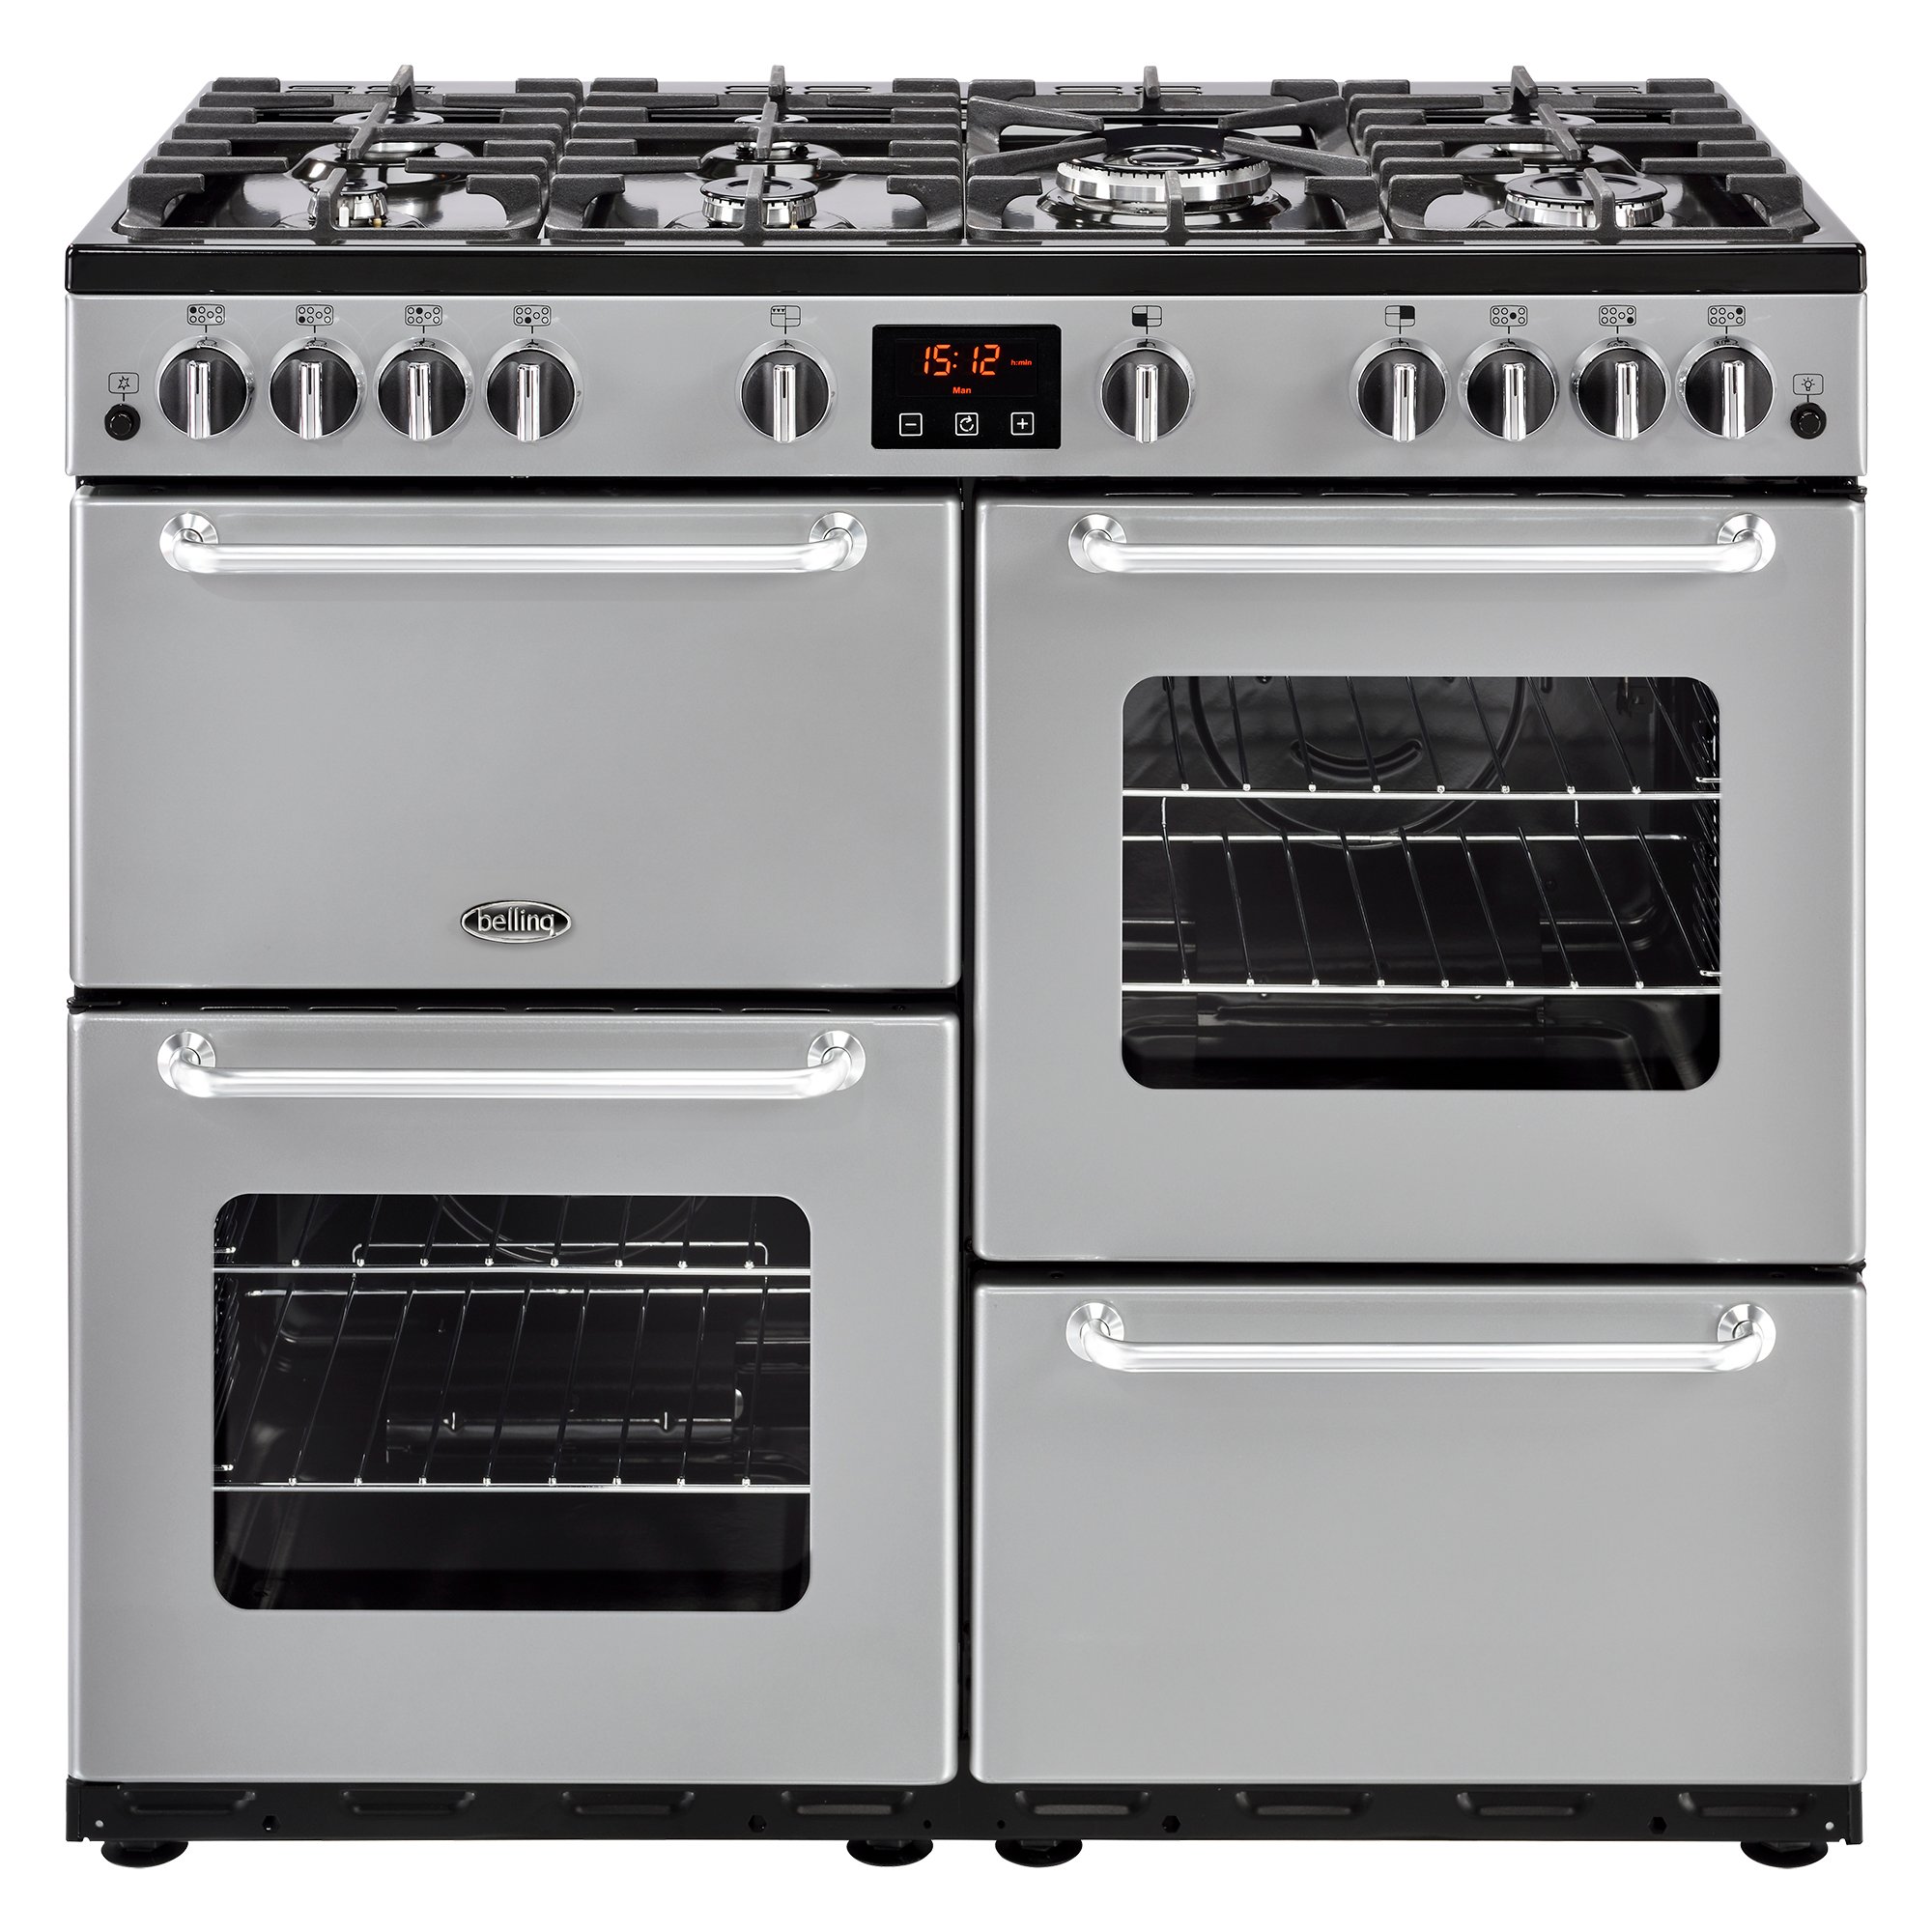 100cm LPG gas range cooker with a 7 burner gas hob, variable gas grill and 2 conventional gas ovens.